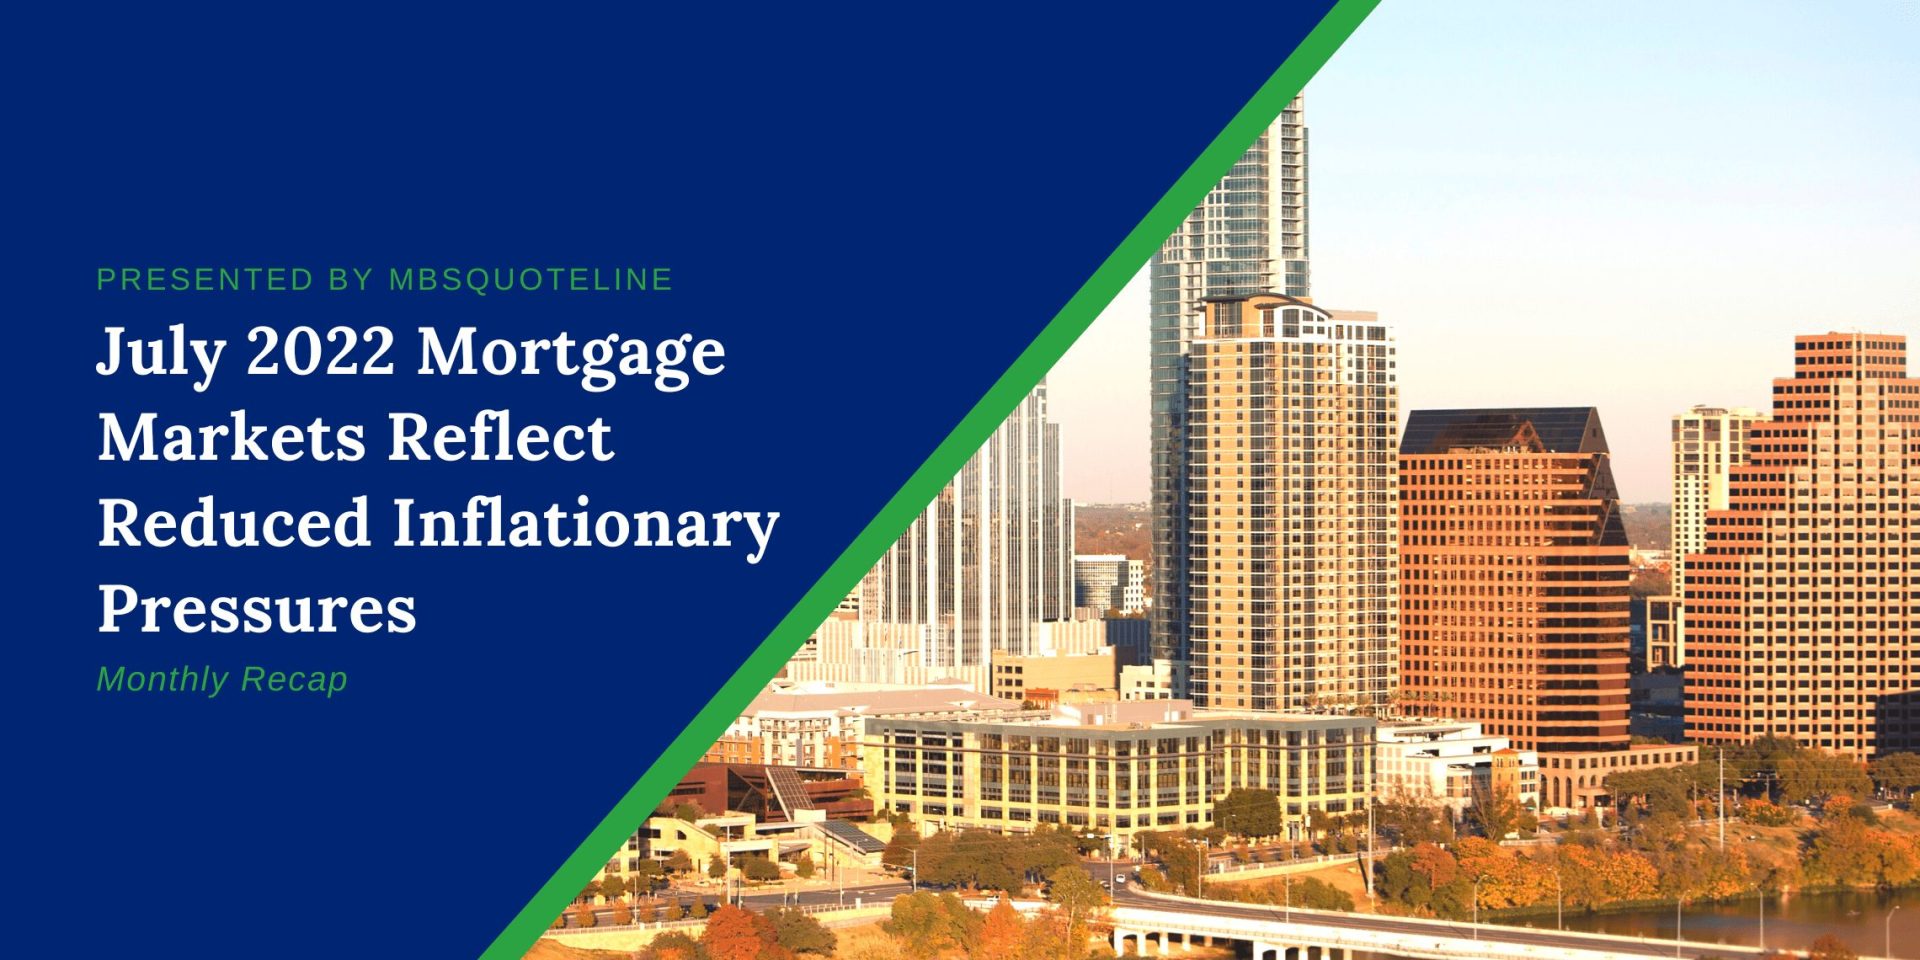 July 2022 Mortgage Markets Reflect Reduced Inflation MortgageTime MBSQuoteline Featured